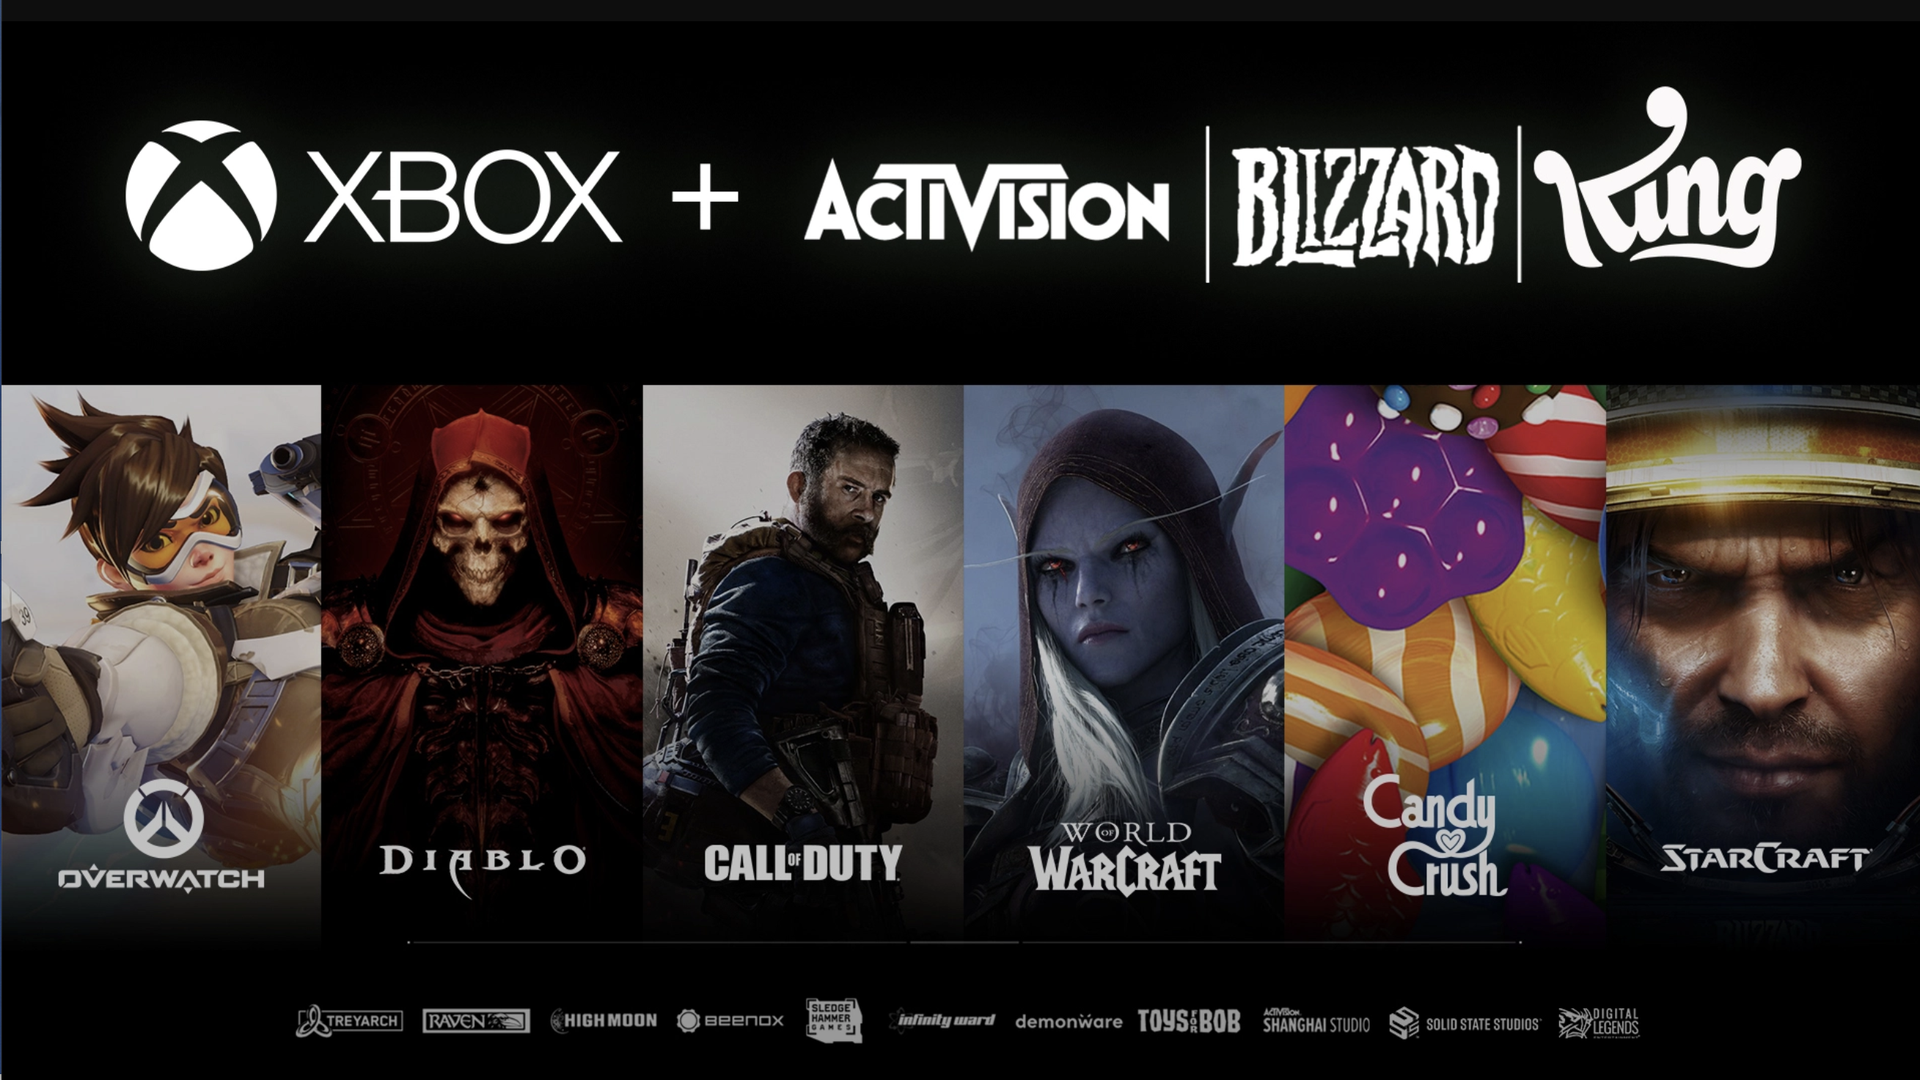 A collage of logos showing the franchises and studios Microsoft will acquire if it buys Activision Blizzard